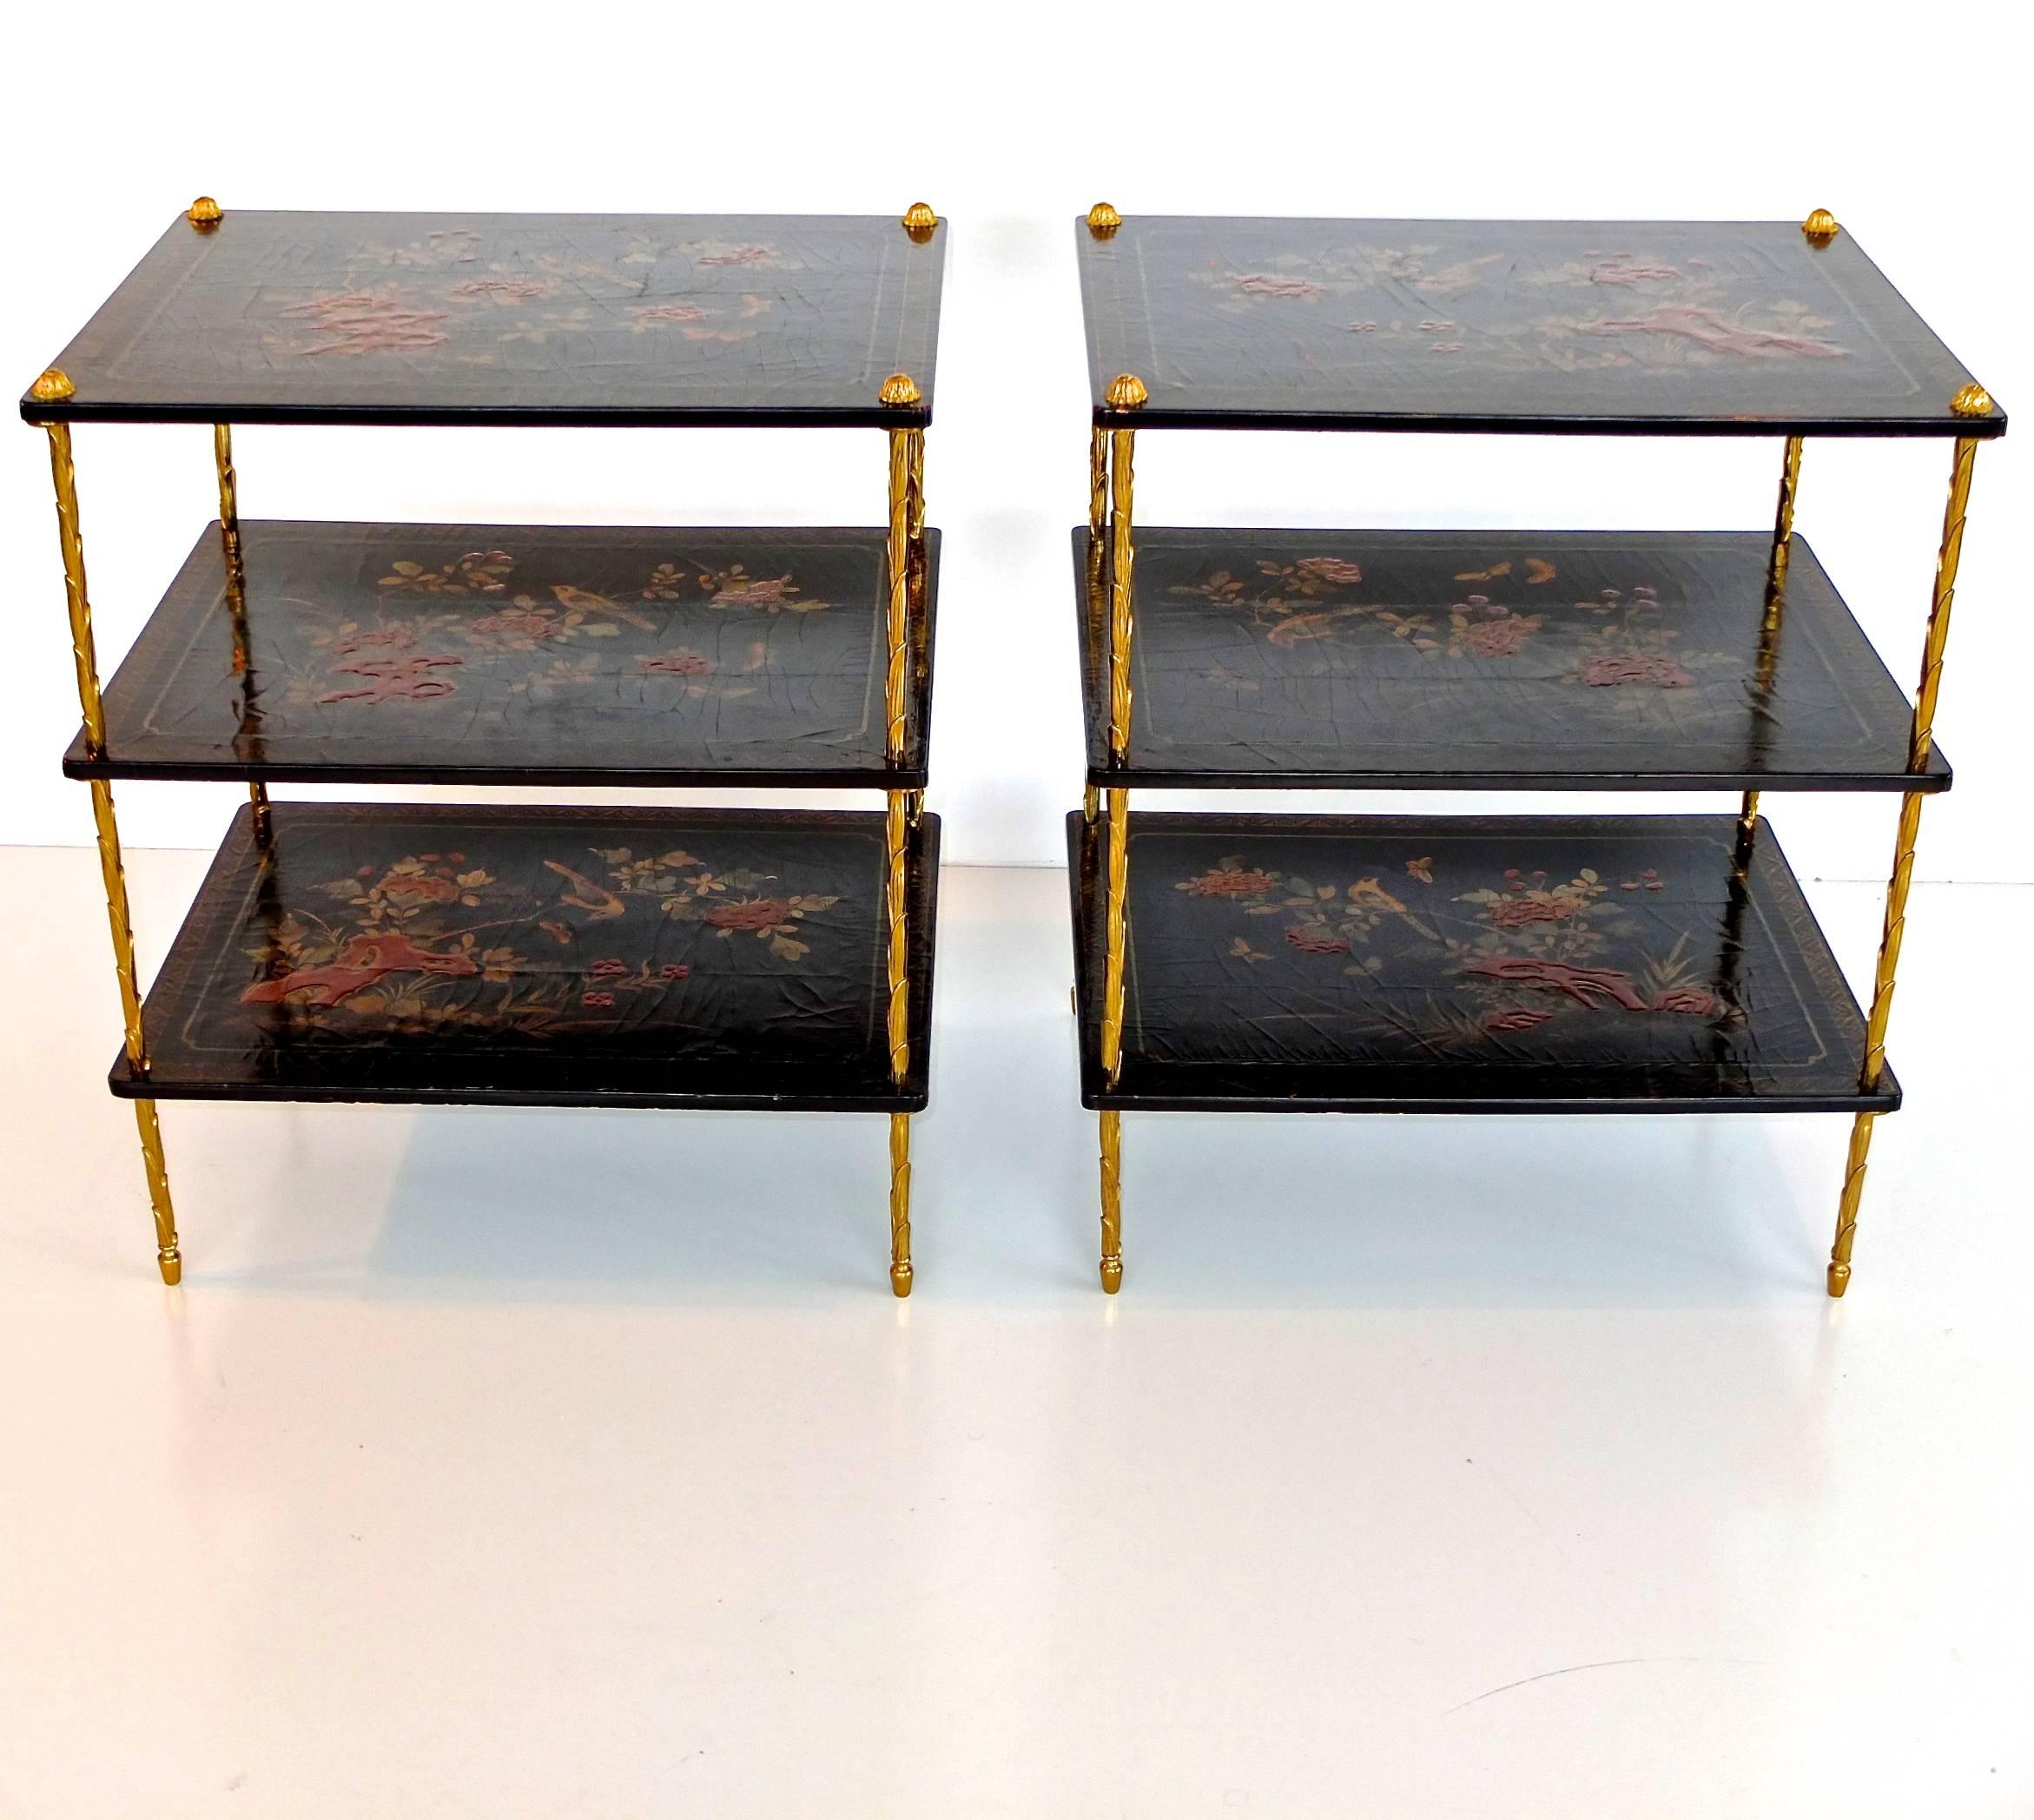 Pair of Maison Jansen three-tier etageres or side tables with signature Maison Jansen gilt metal palm trunk form supports and legs and three black japanned lacquered wood tiers.

Perfect size for nightstands or side tables.

Very good original